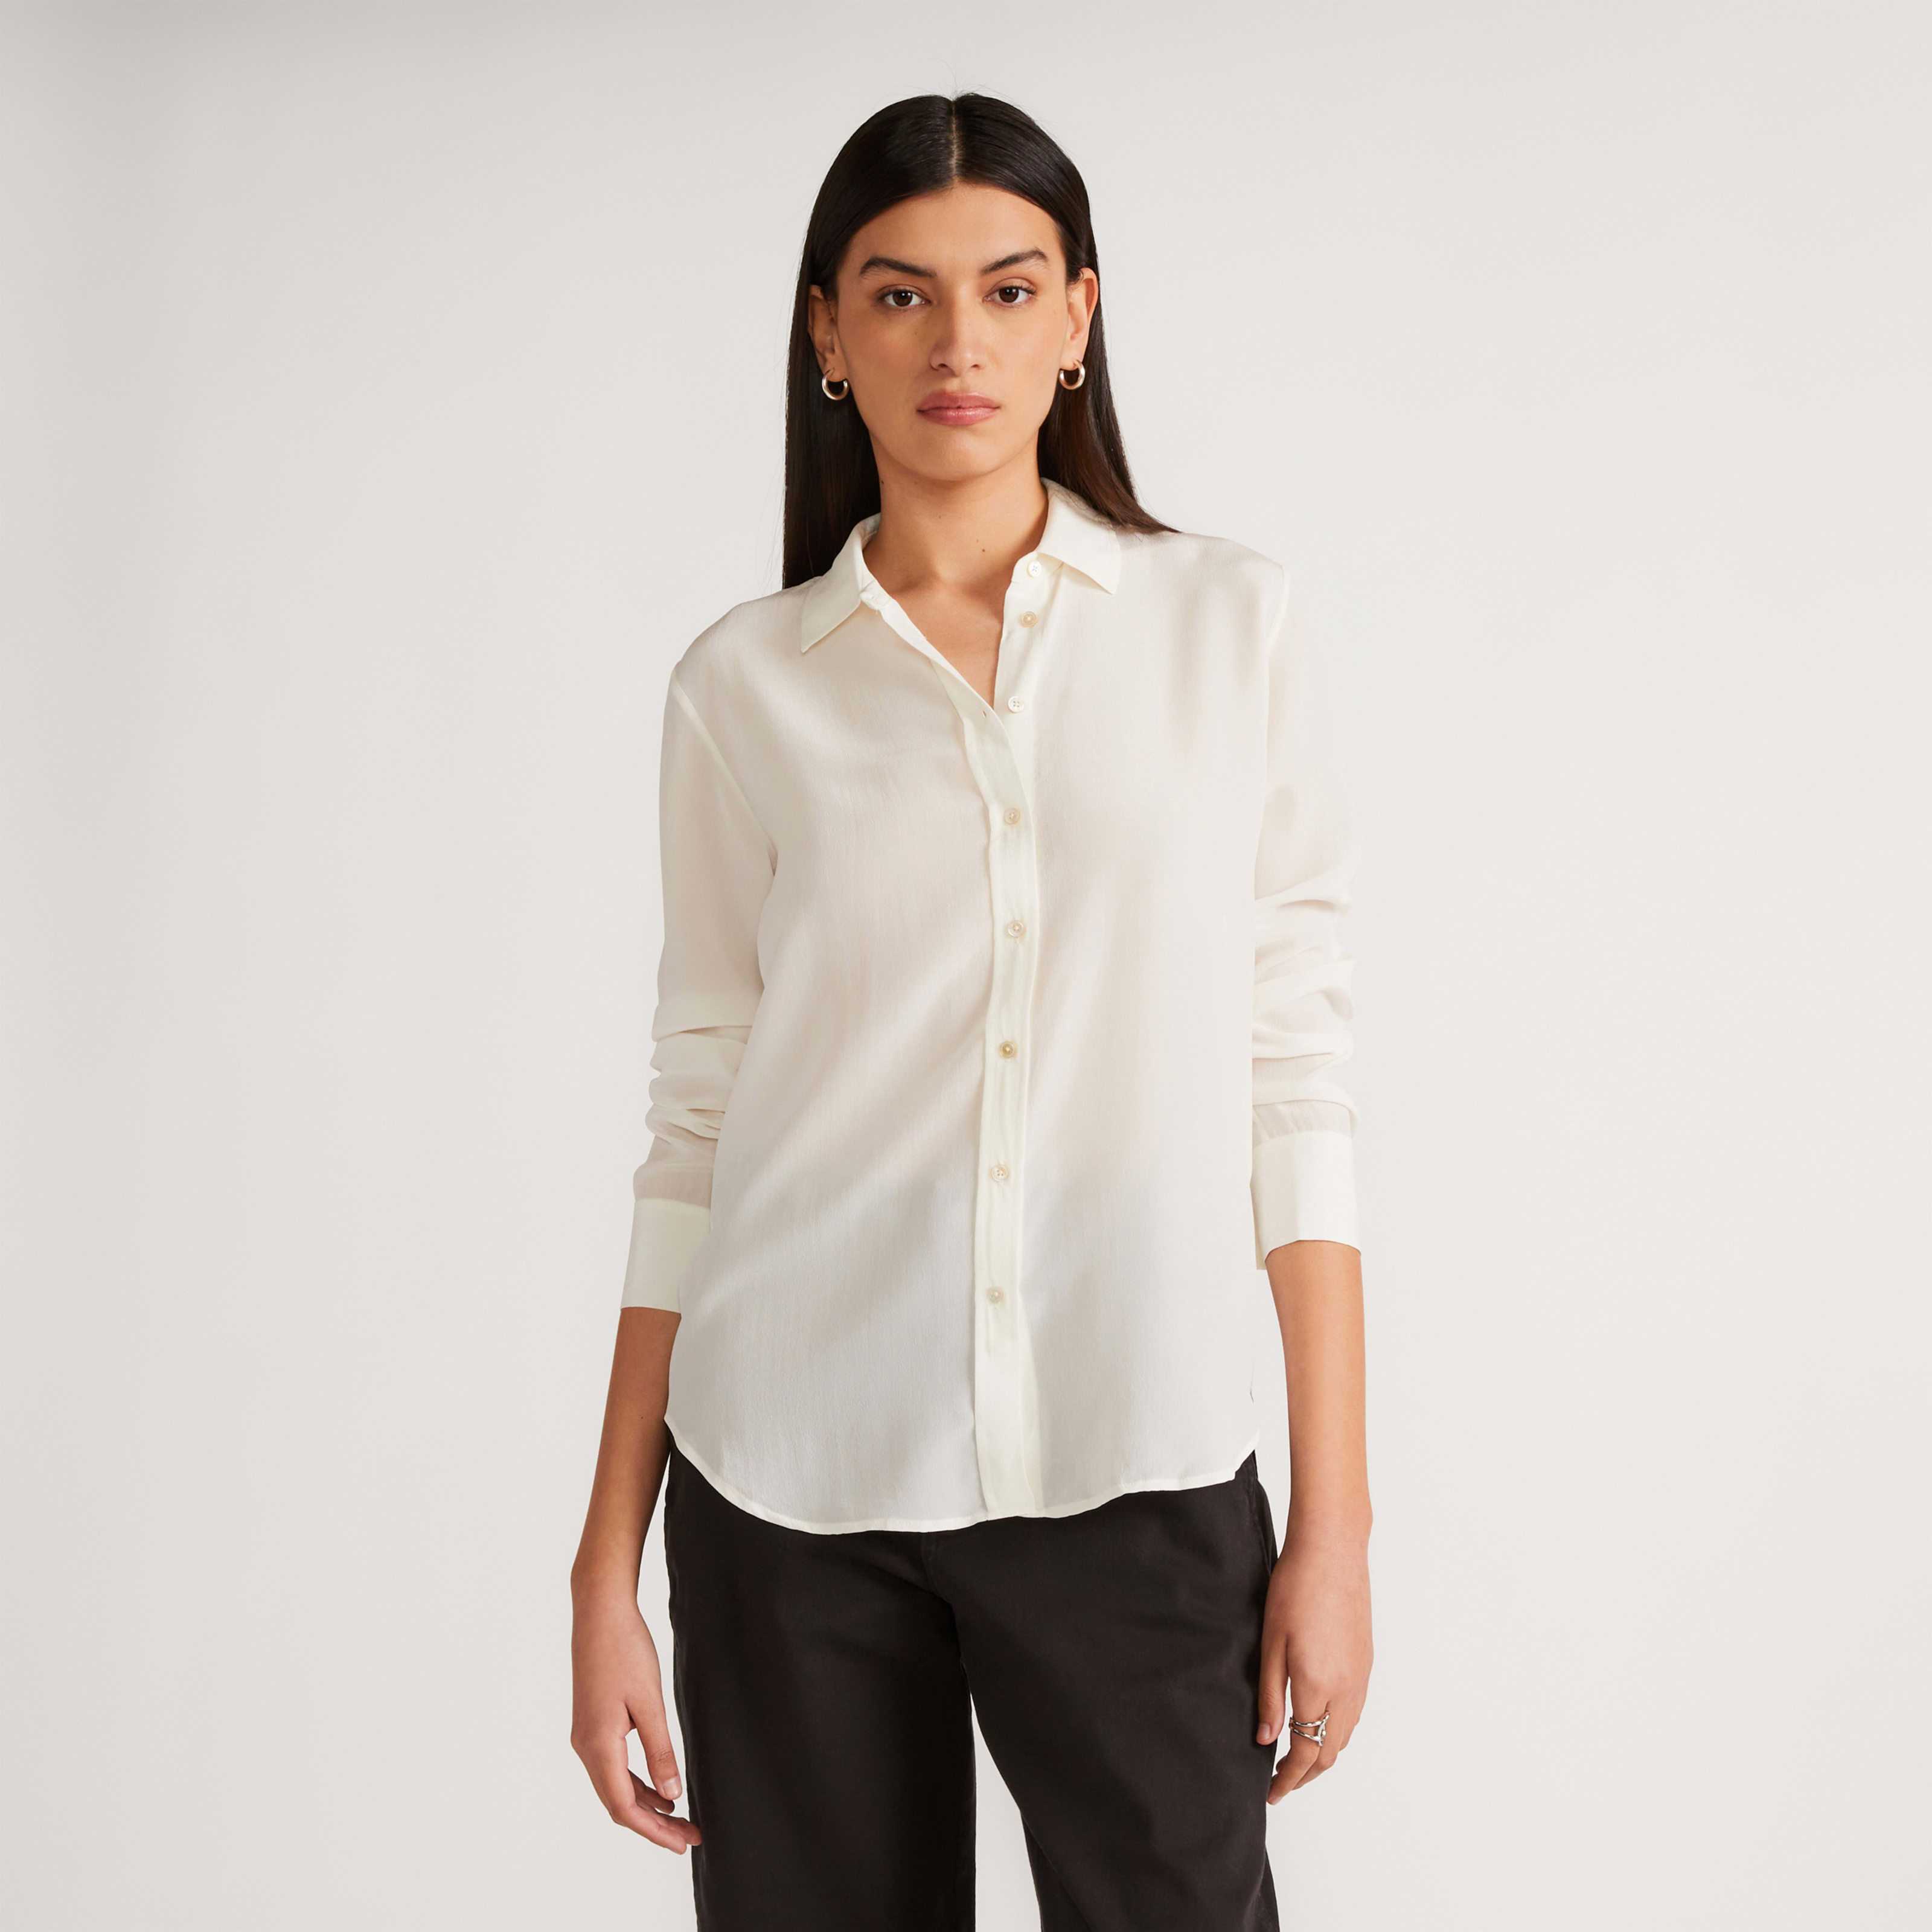 Women's Washable Clean Silk Relaxed Shirt by Everlane in Off White, Size 2